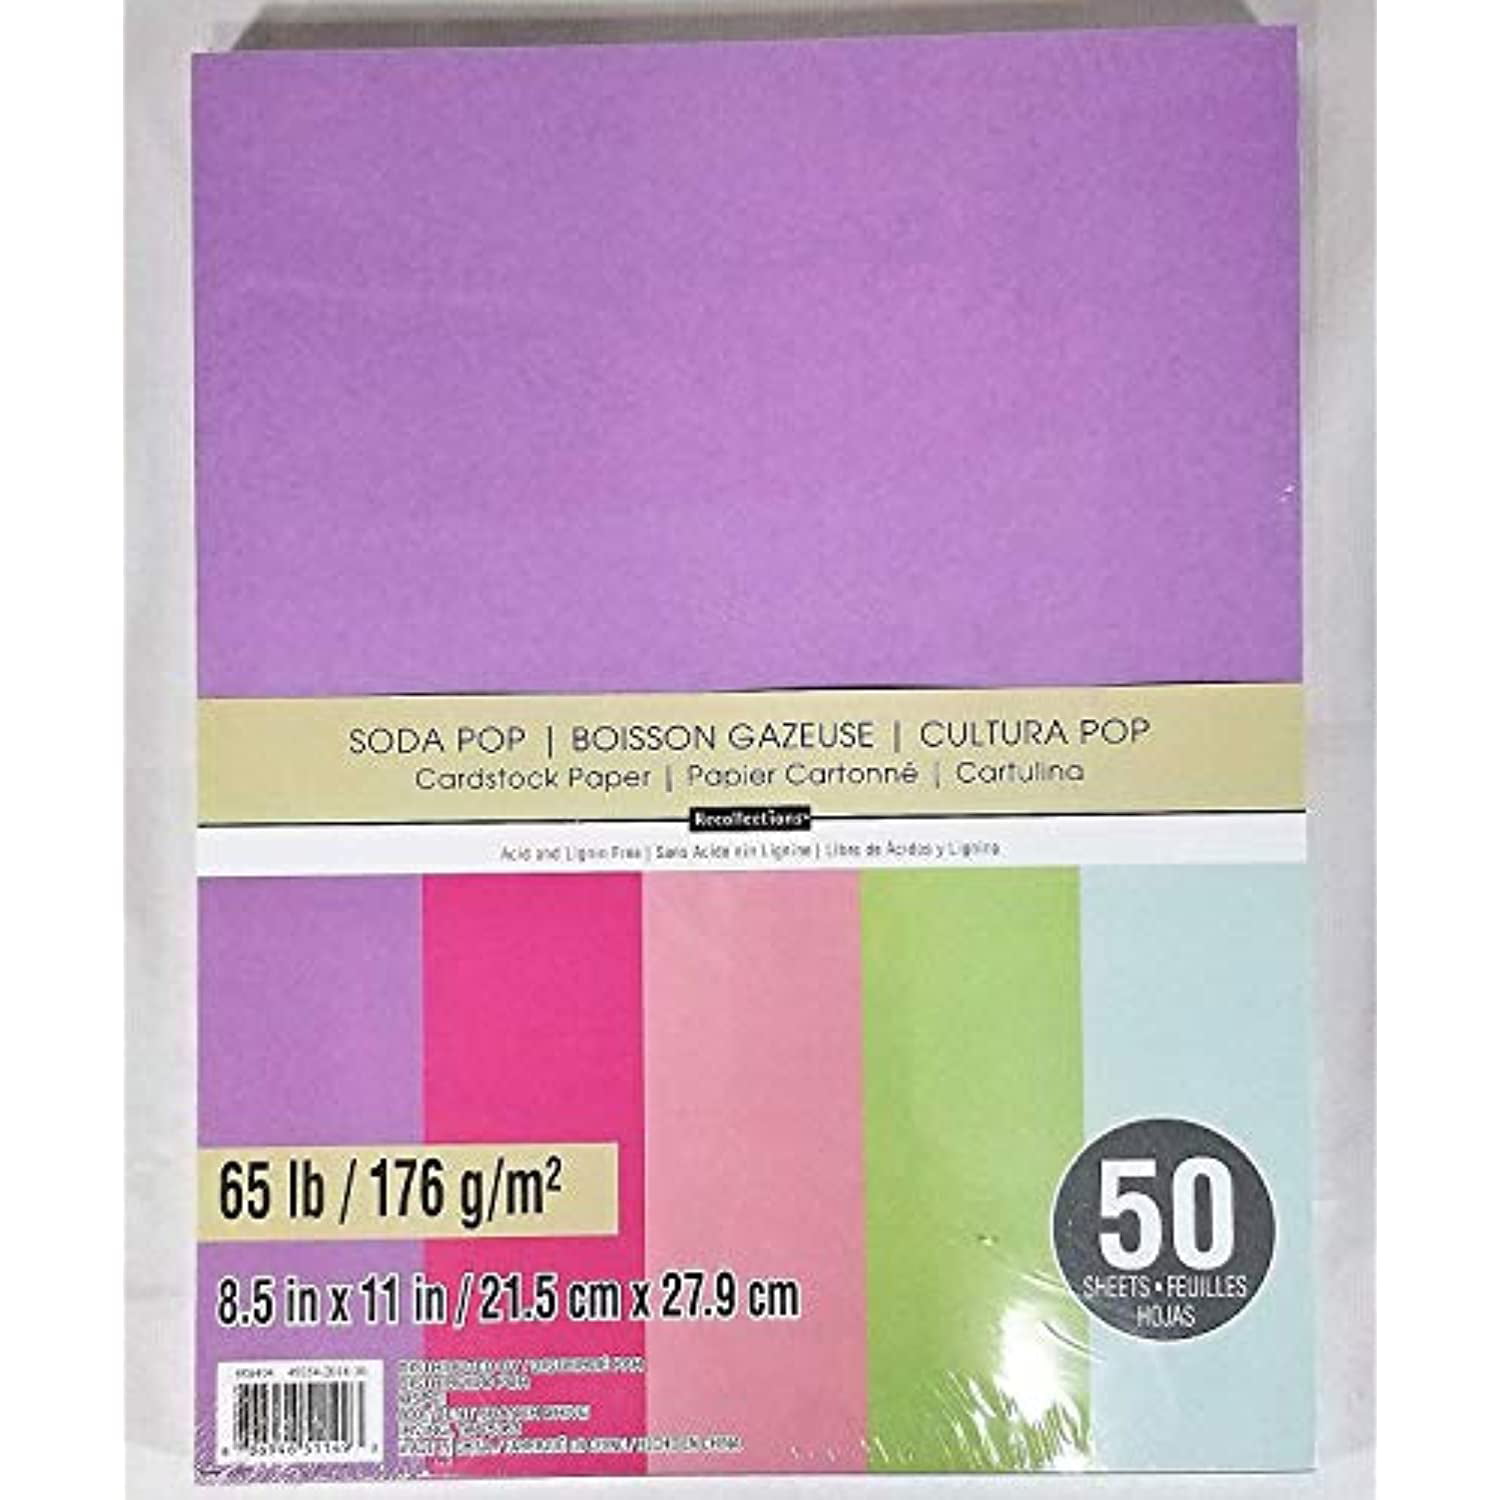 Primary 8.5 x 11 Cardstock Paper by Recollections®, 50 Sheets